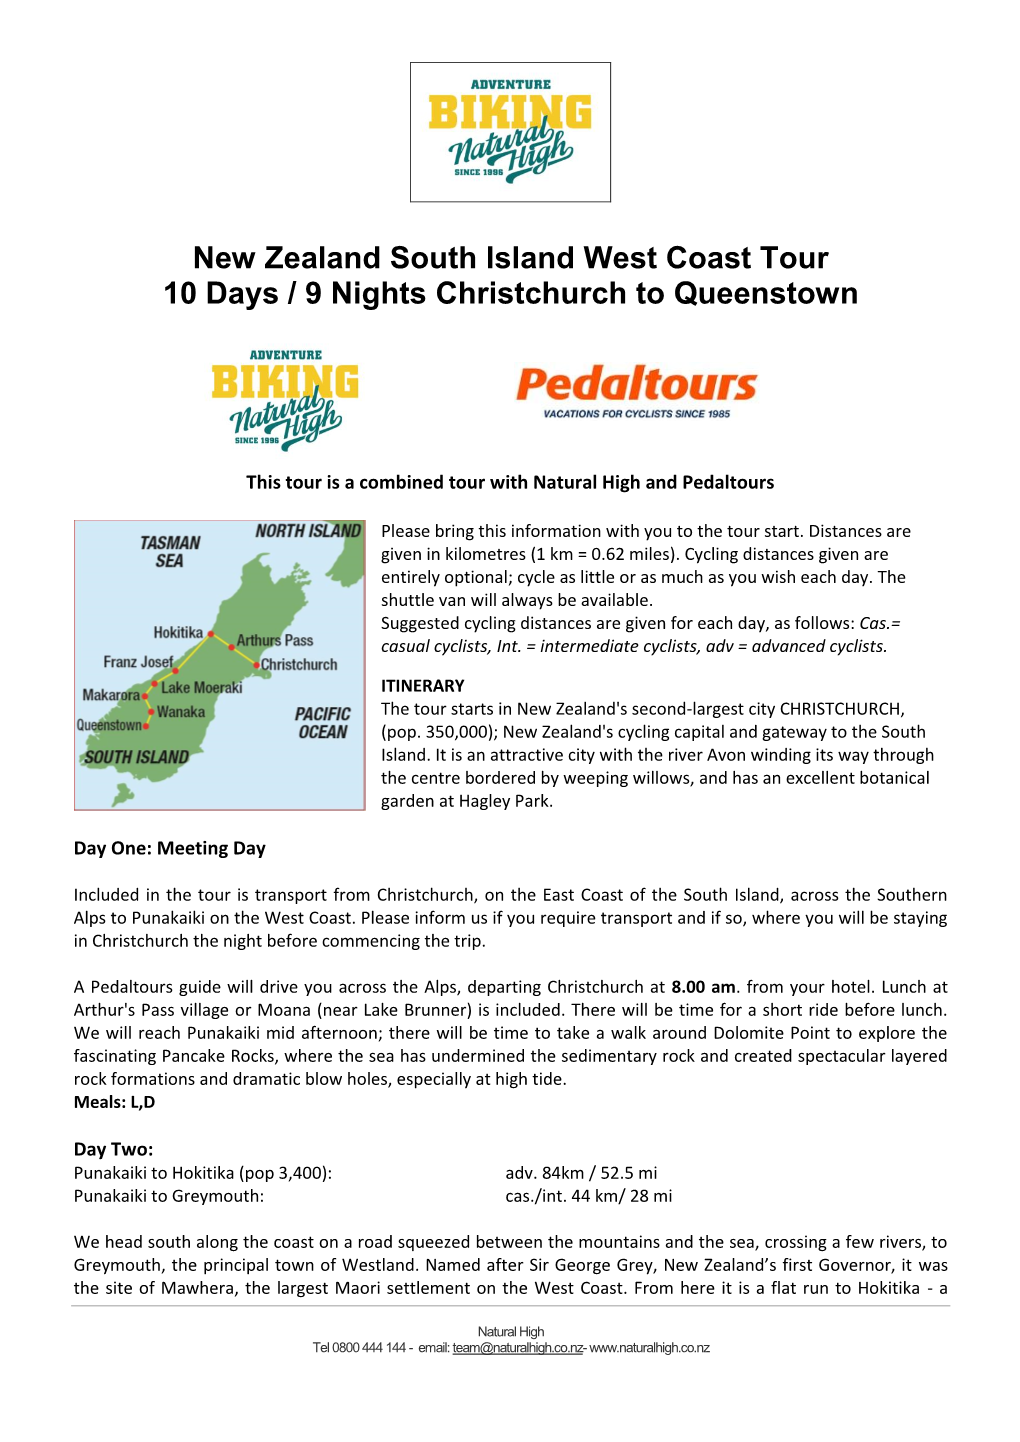 New Zealand South Island West Coast Tour 10 Days / 9 Nights Christchurch to Queenstown